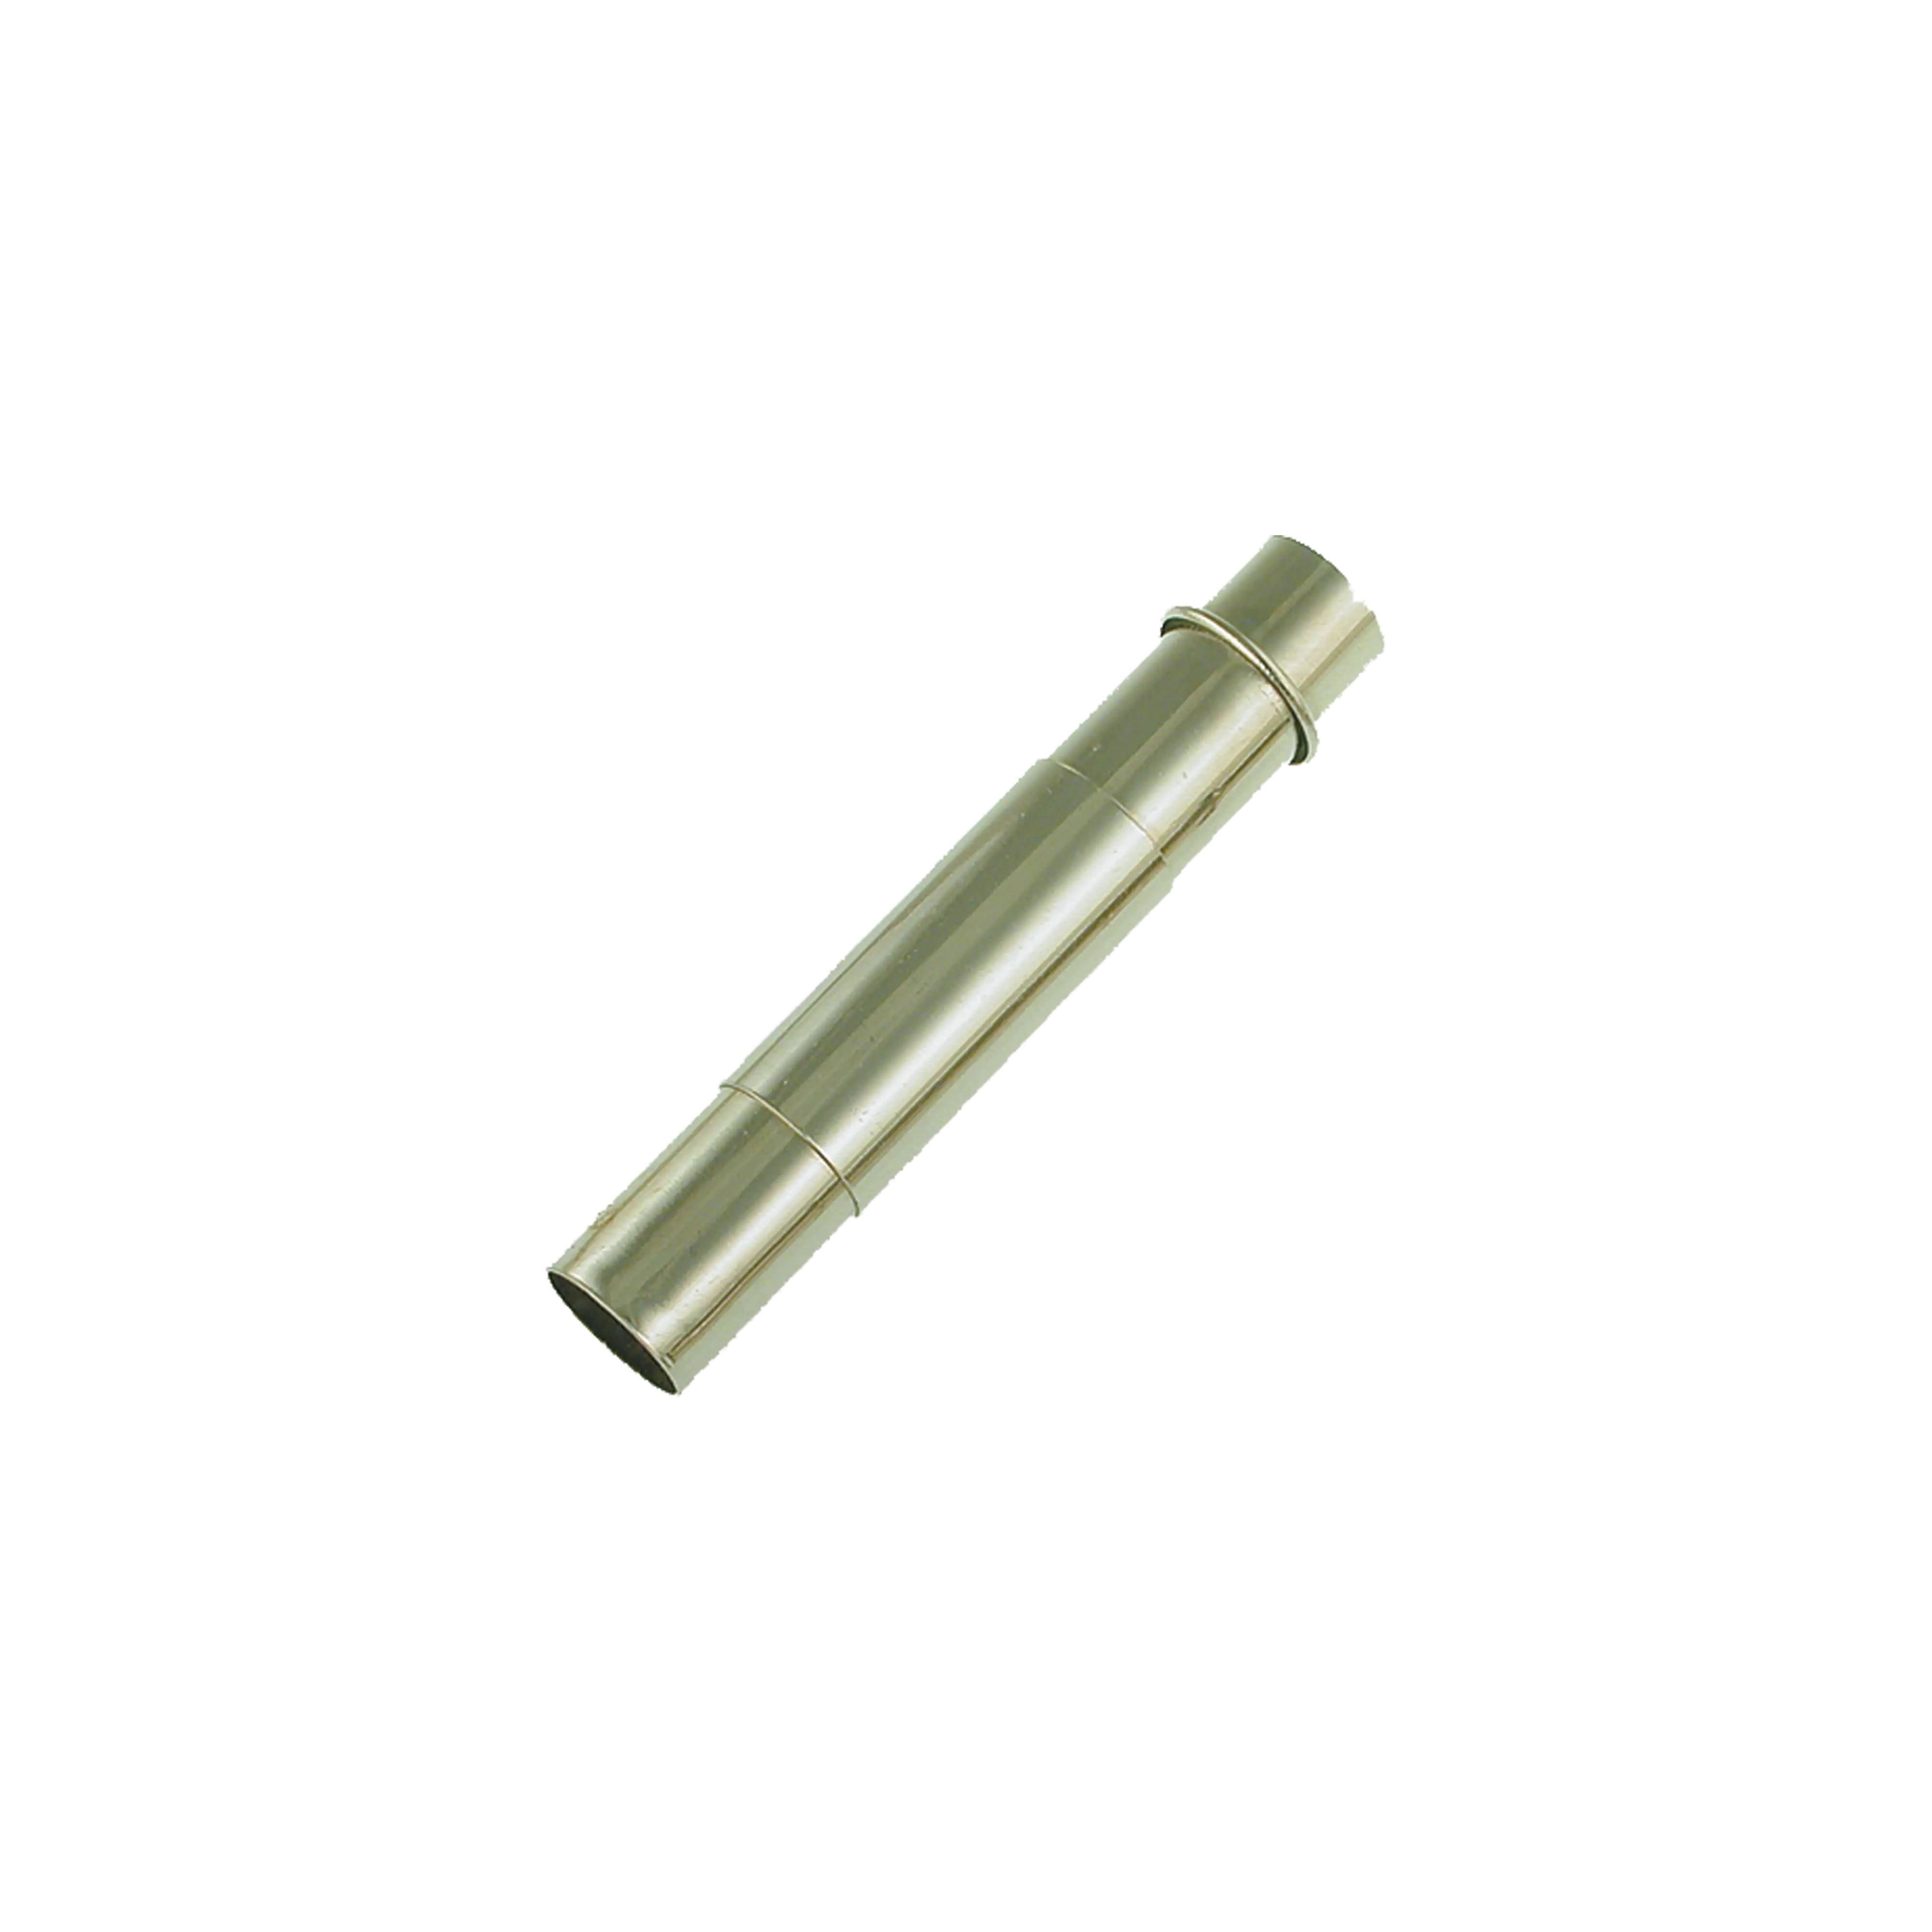 Reinforced Brass Ferrules (Chrome Plated) - Clearance